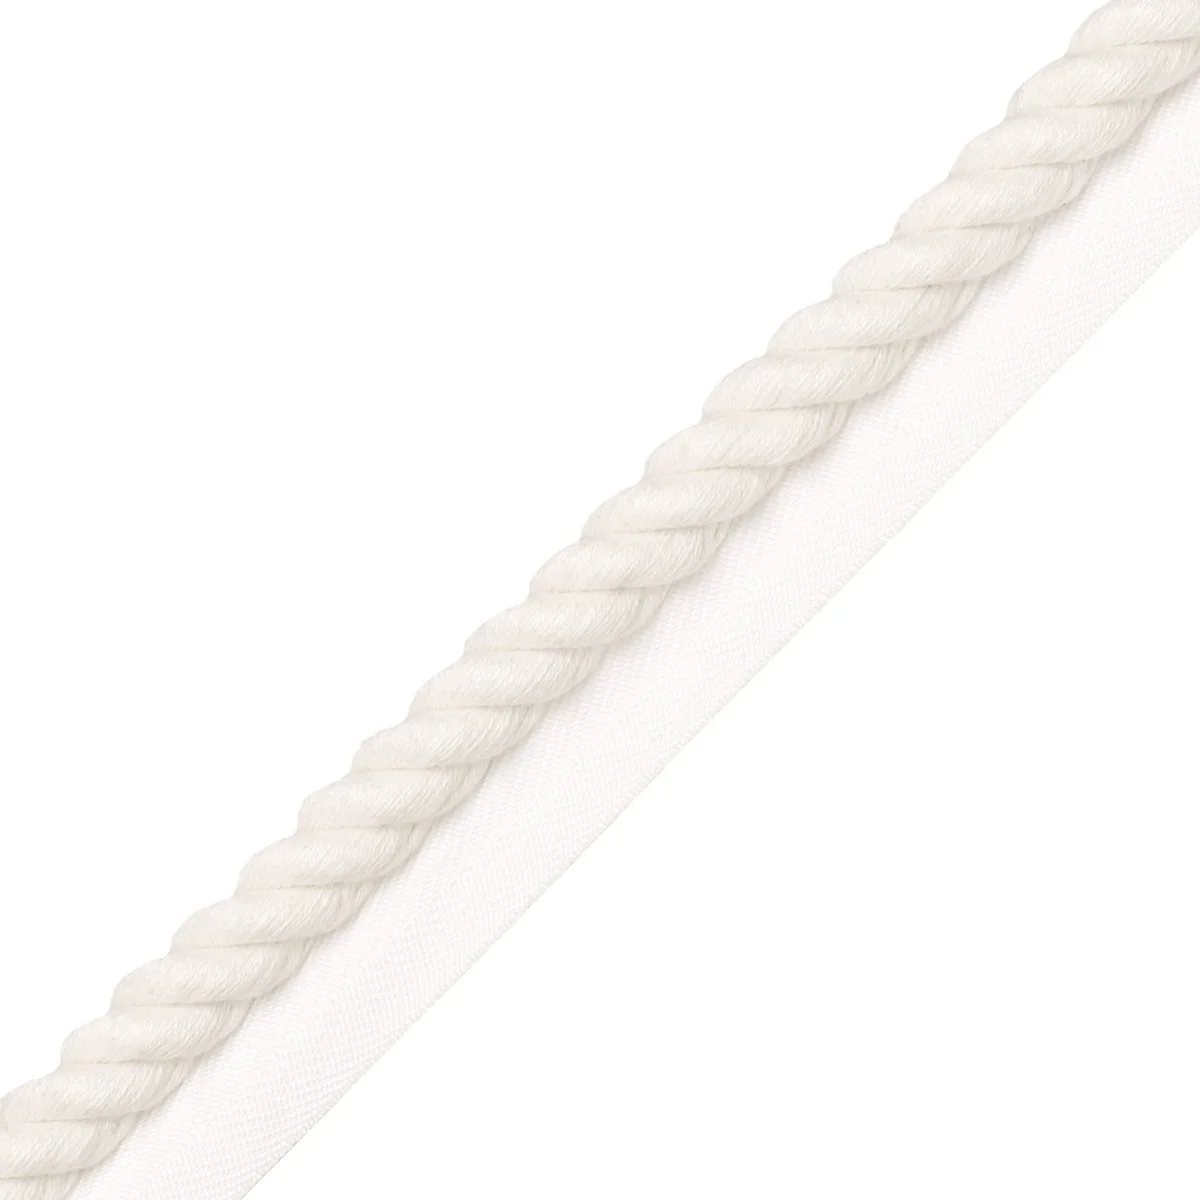 13mm Cotton Cord With Tape